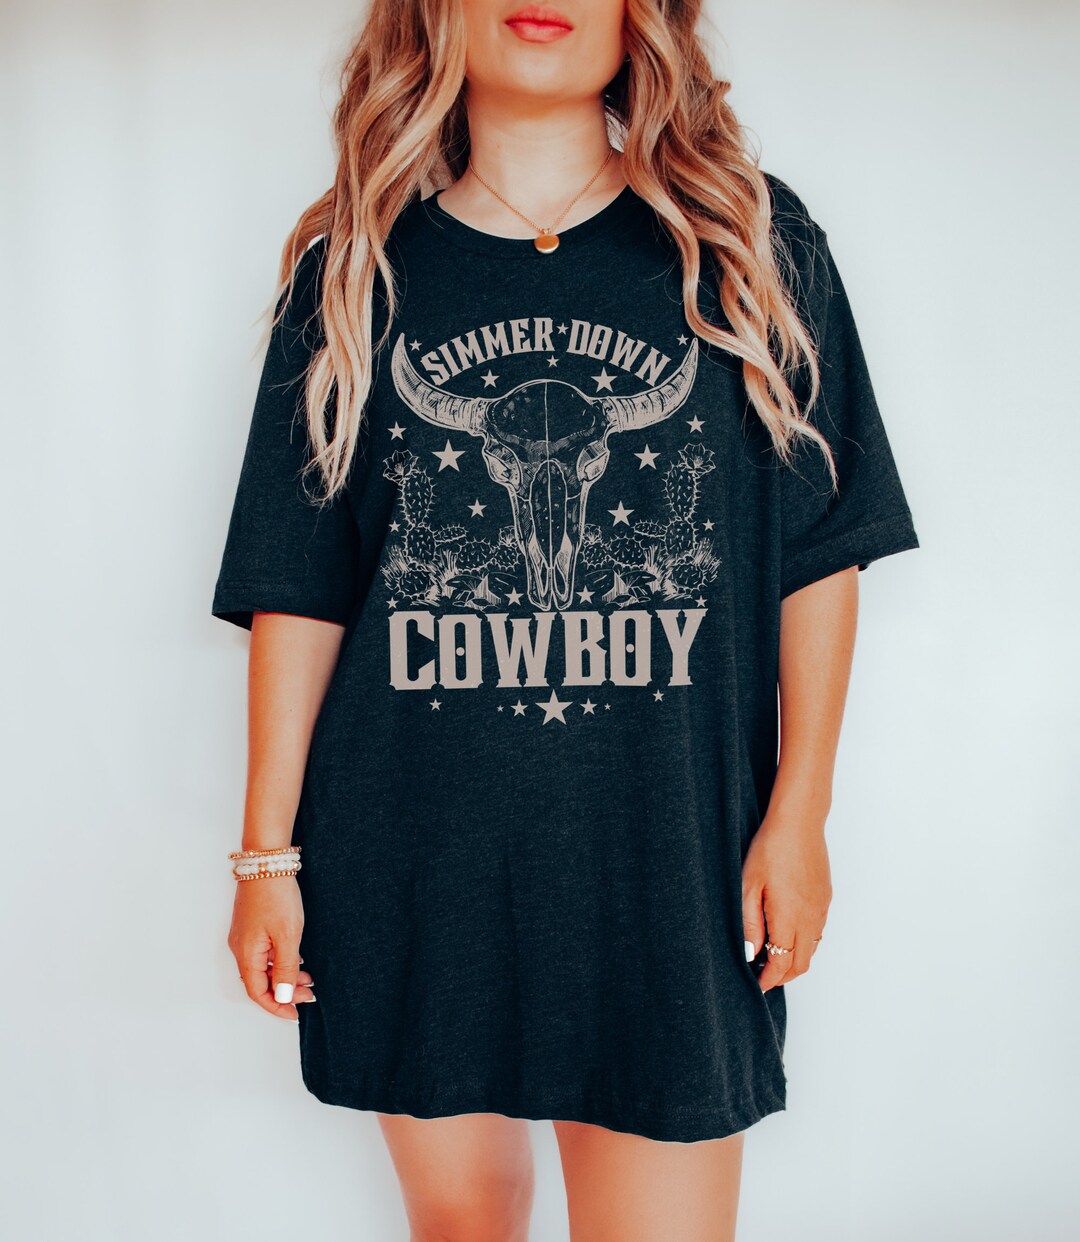 Simmer Down Cowboy Shirt Cowgirl Shirt Western Graphic Tee Cow - Etsy